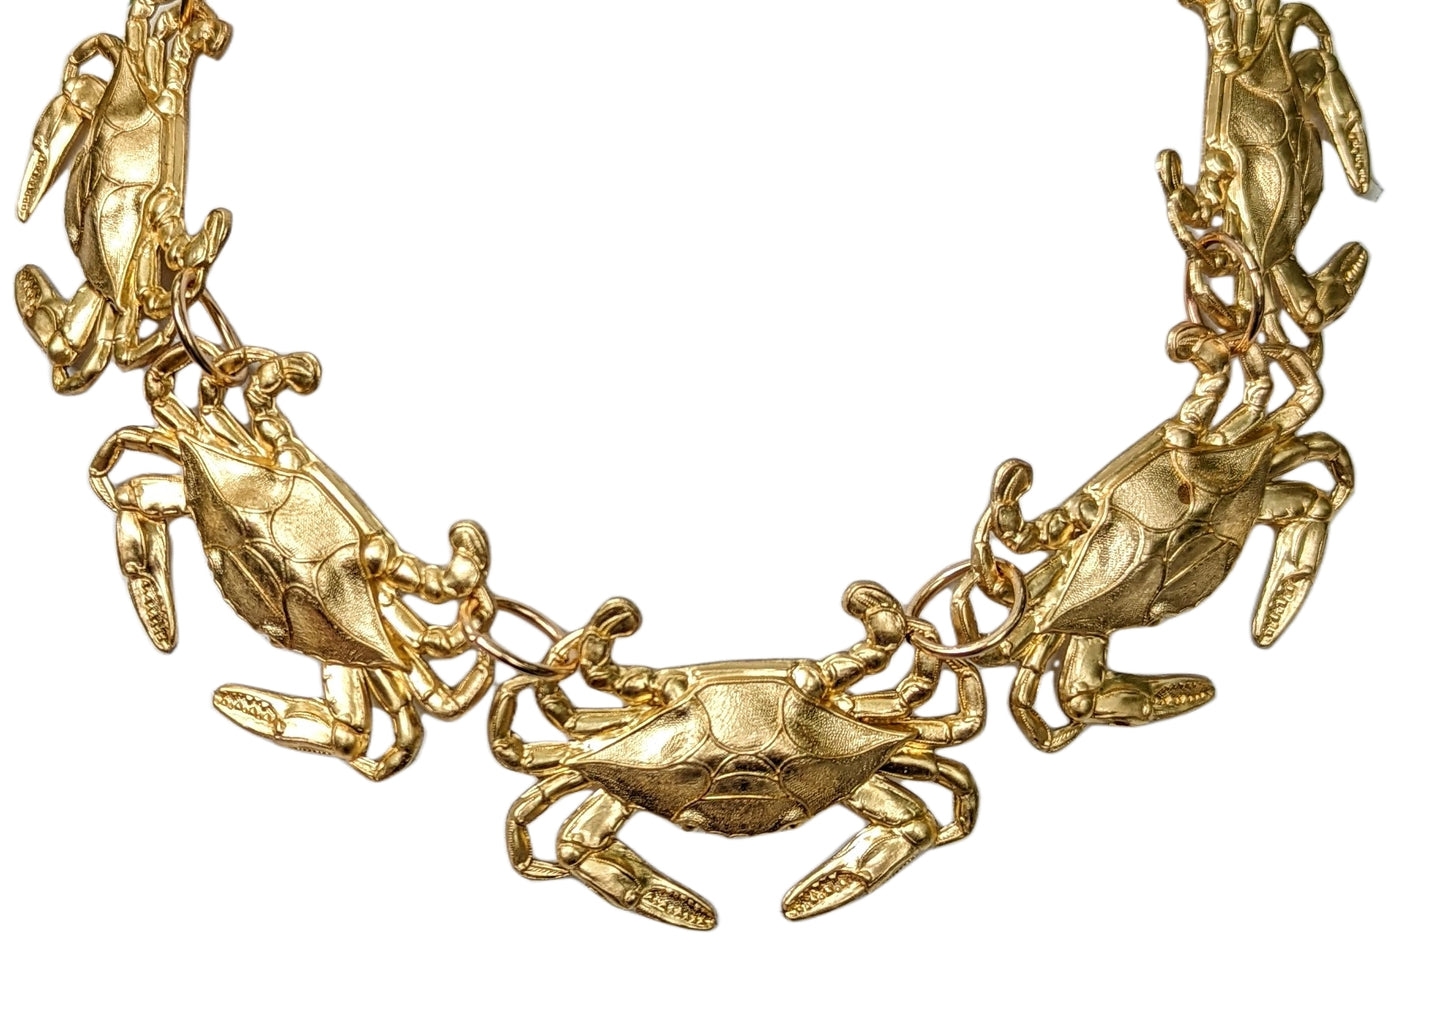 24K Gold Plated Crab Collar Necklace USA Made Brass 18 inches adjustable Sugar Gay Isber